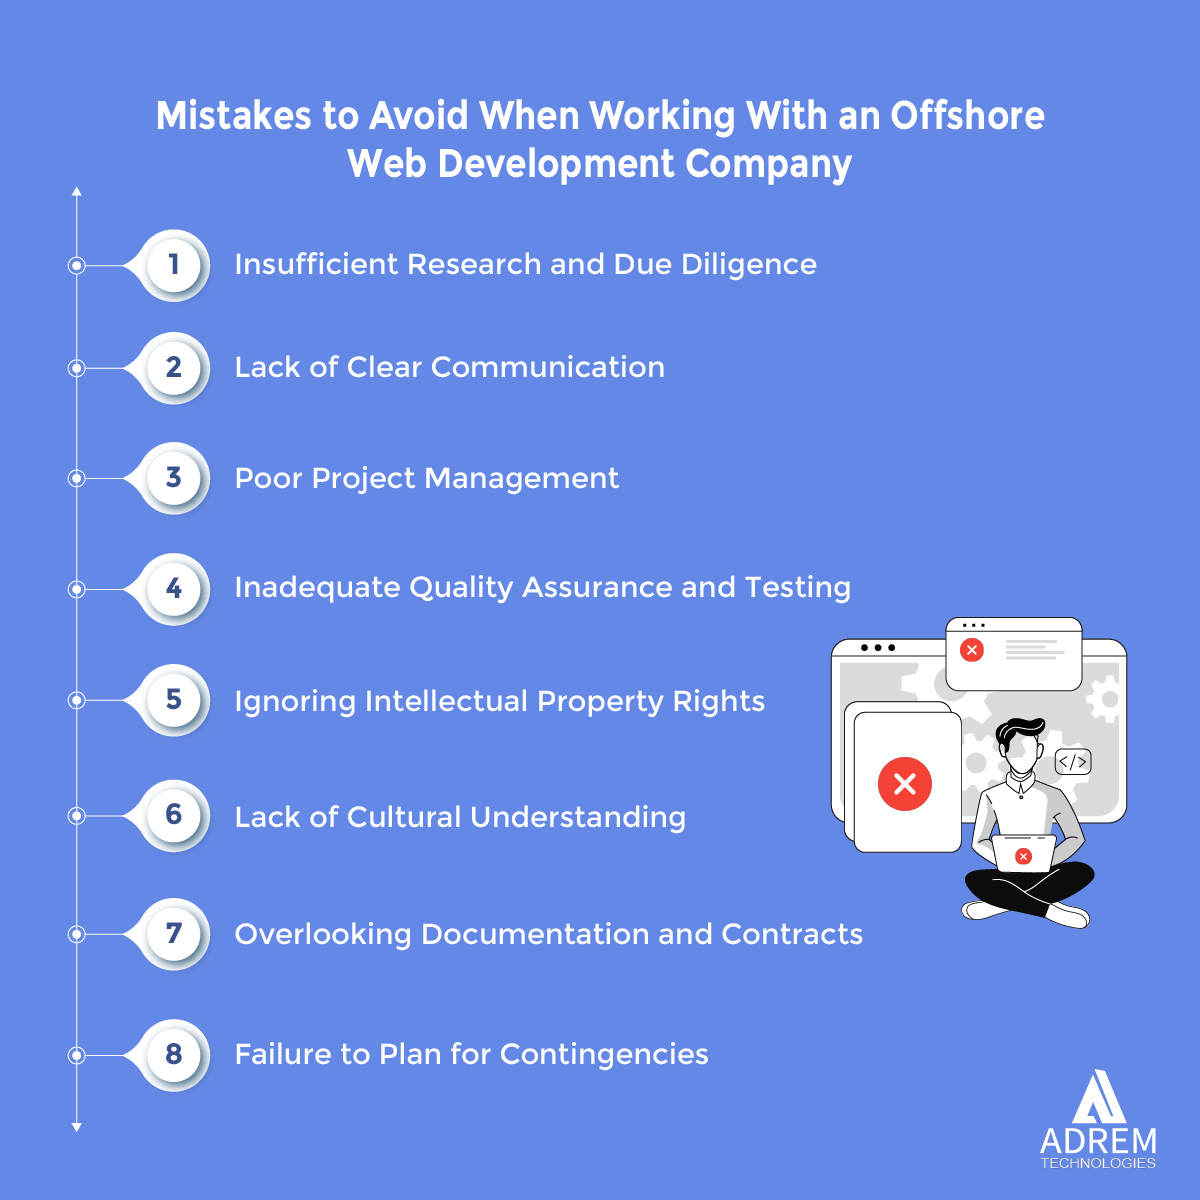 Mistakes to Avoid When Working With an Offshore Web Development Company